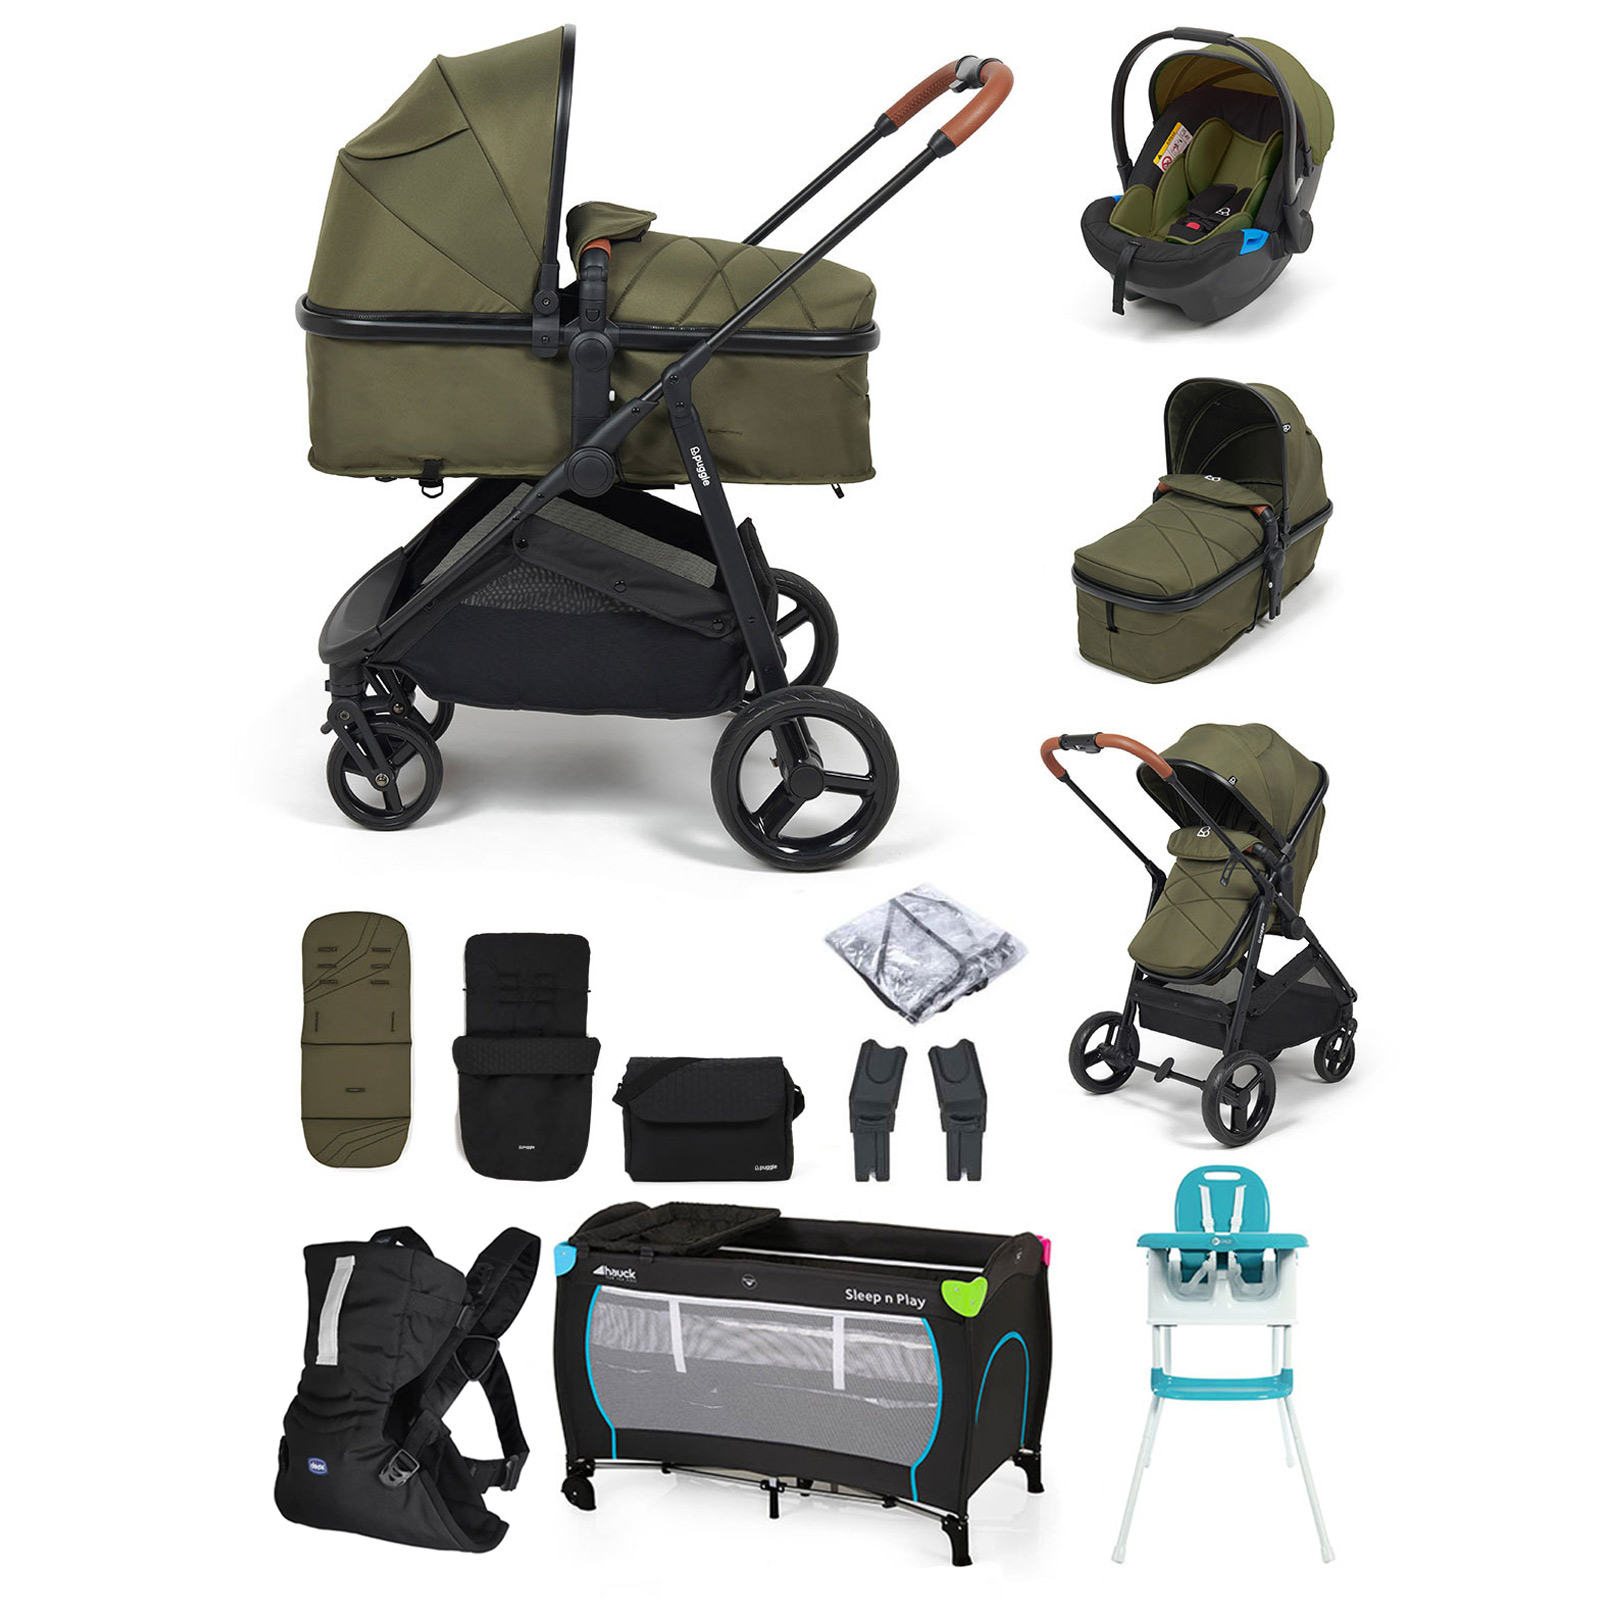 Puggle Monaco XT 2in1 Pram Pushchair Everything You Need Travel System with Footmuff & Changing Bag - Forest Green